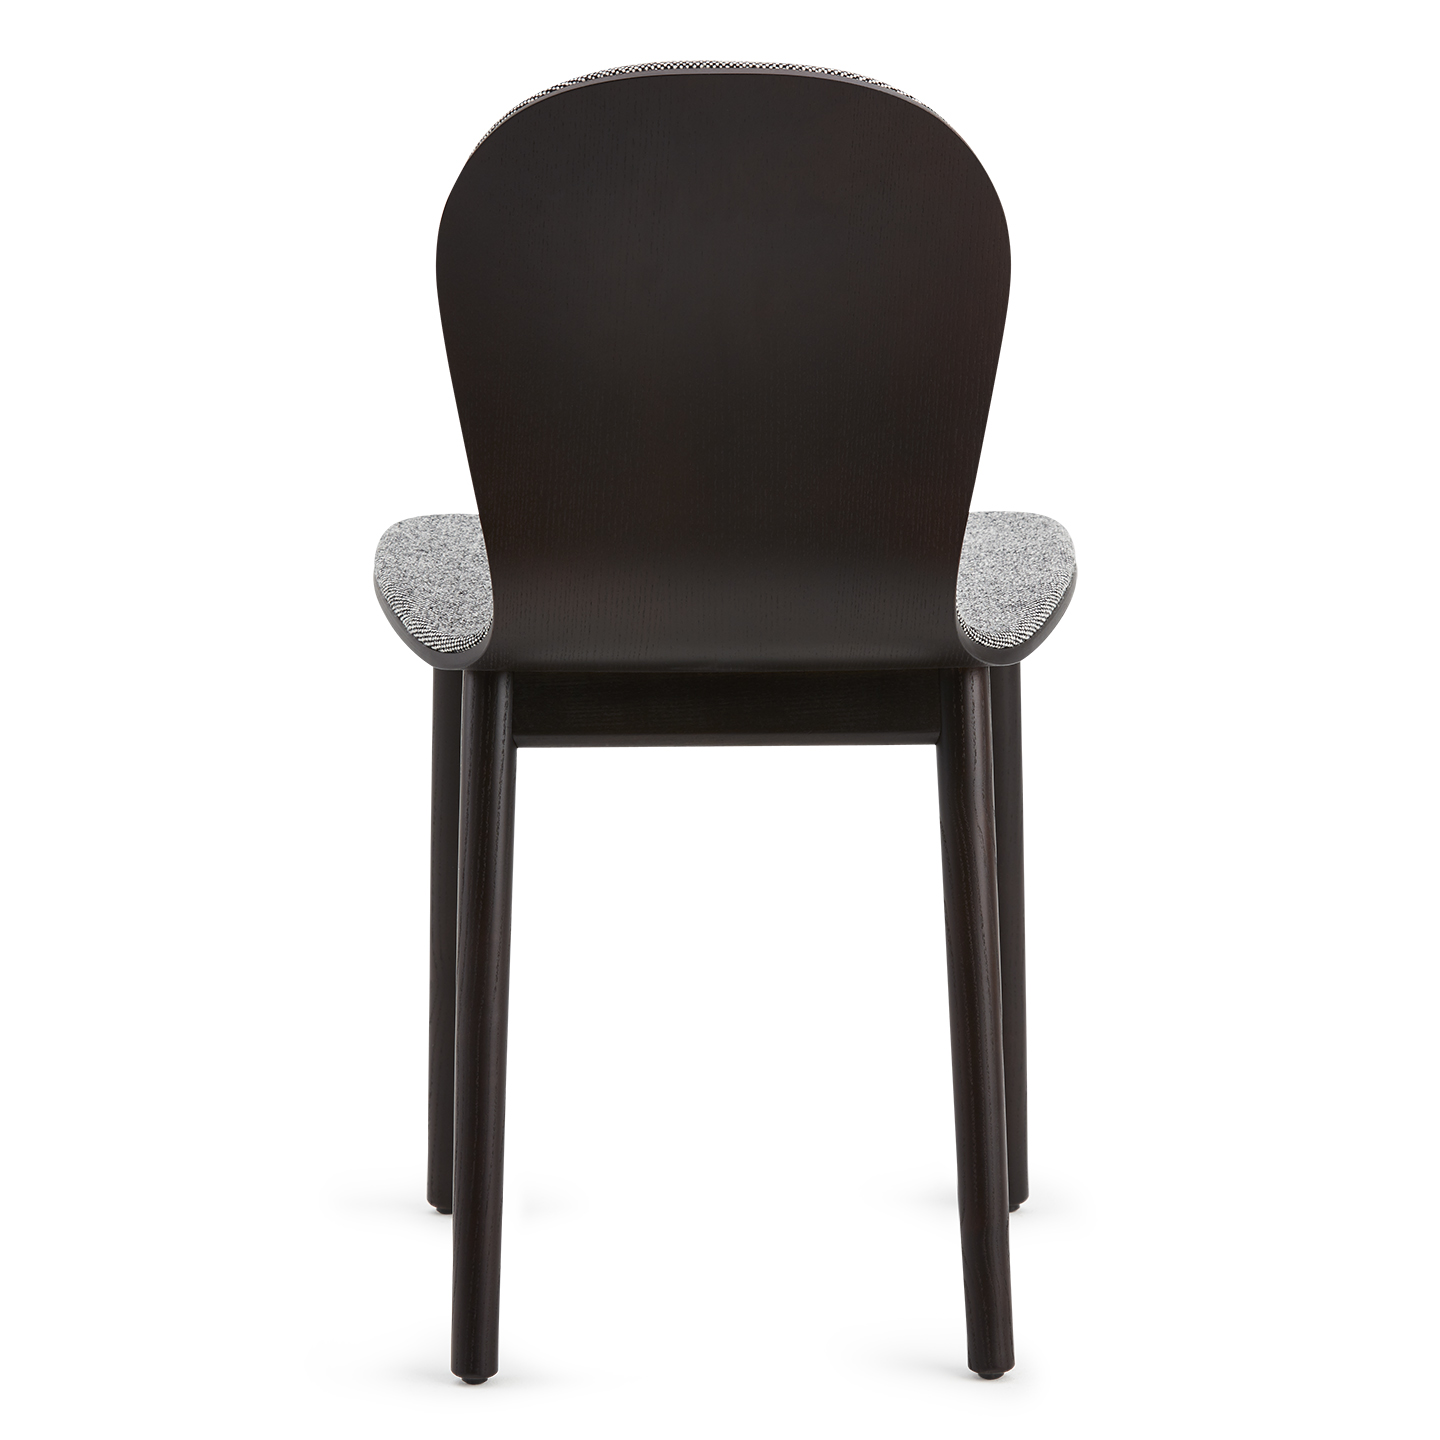 Haworth Bac Two side chair in grey and dark brown back view